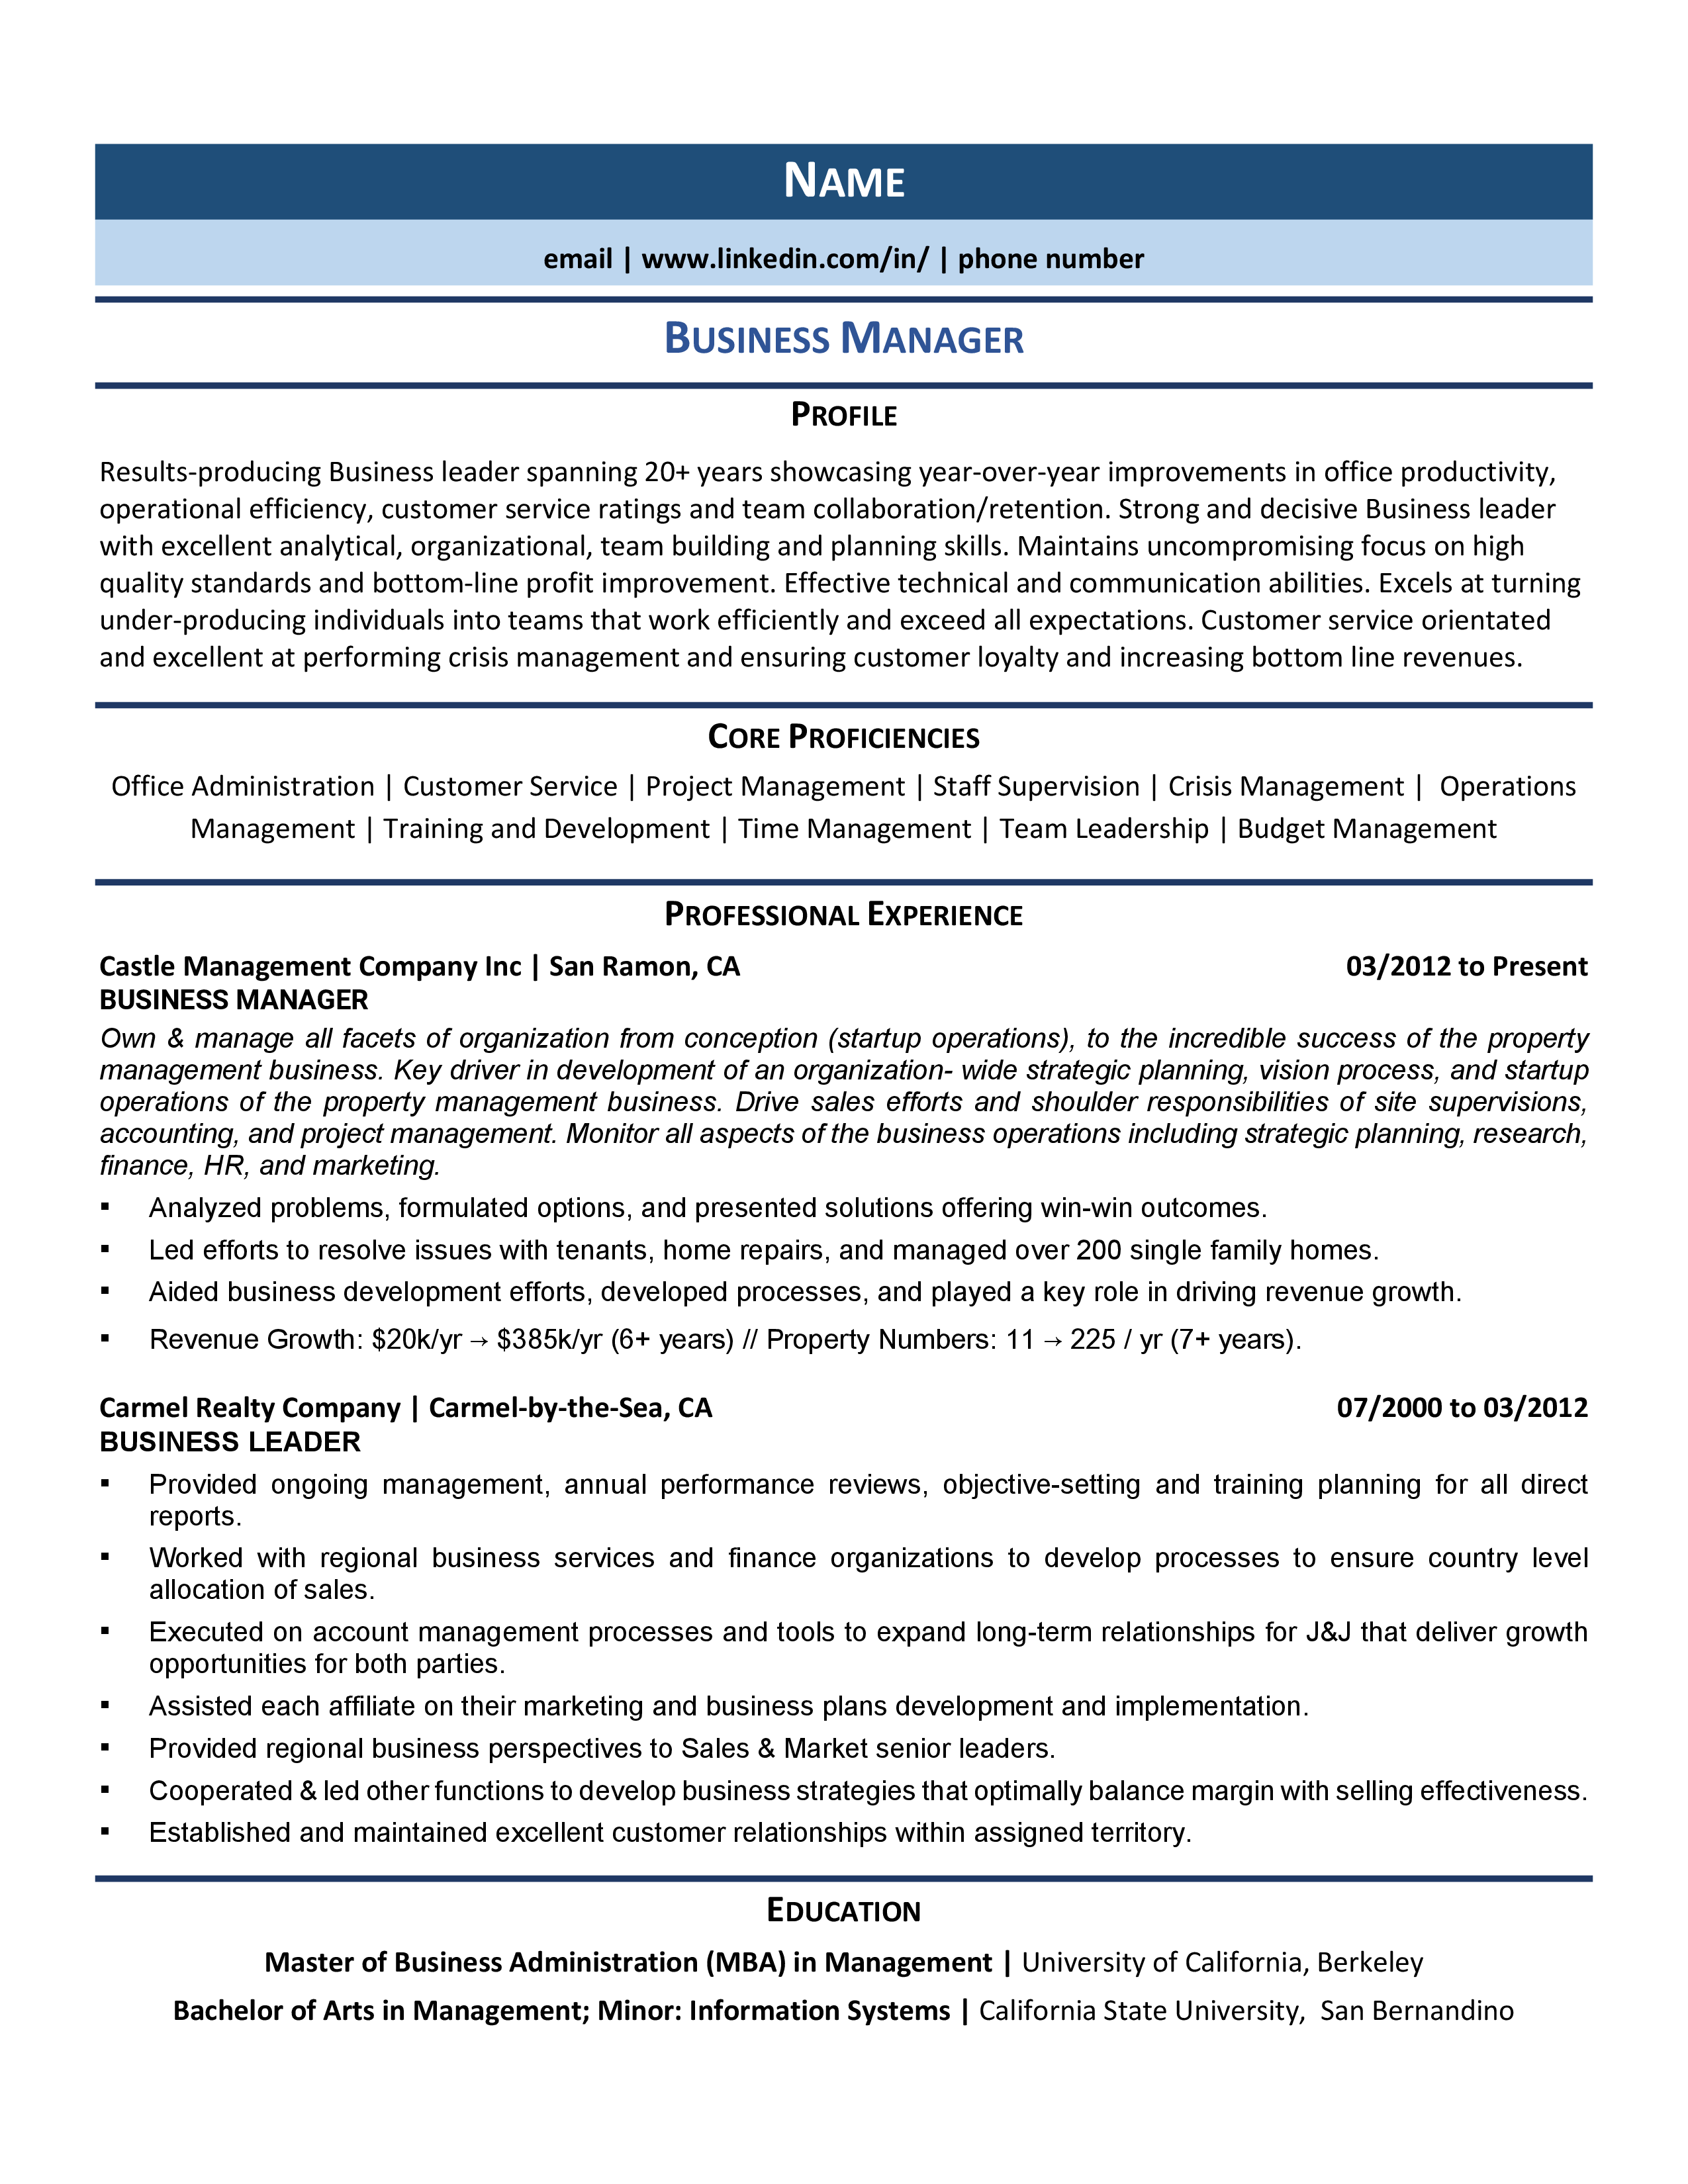 Business Manager Resume Example Guide (2021) ZipJob